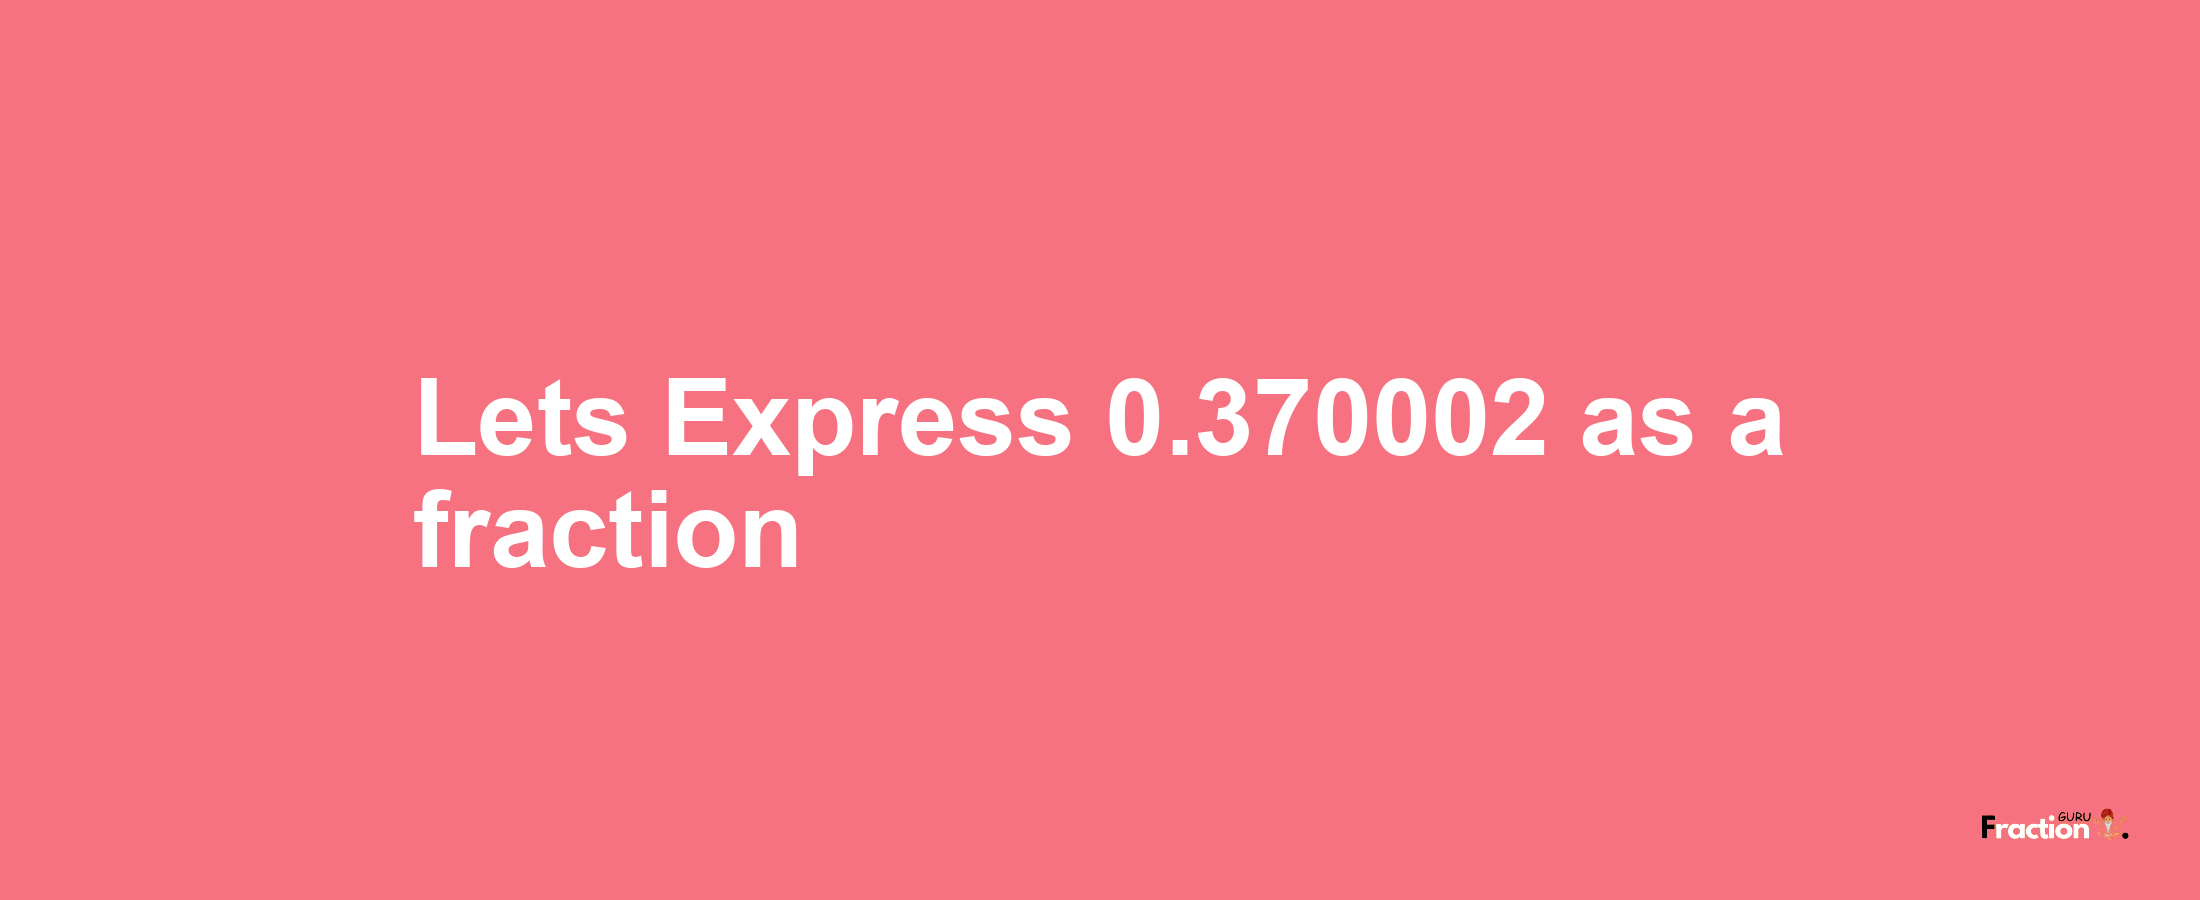 Lets Express 0.370002 as afraction